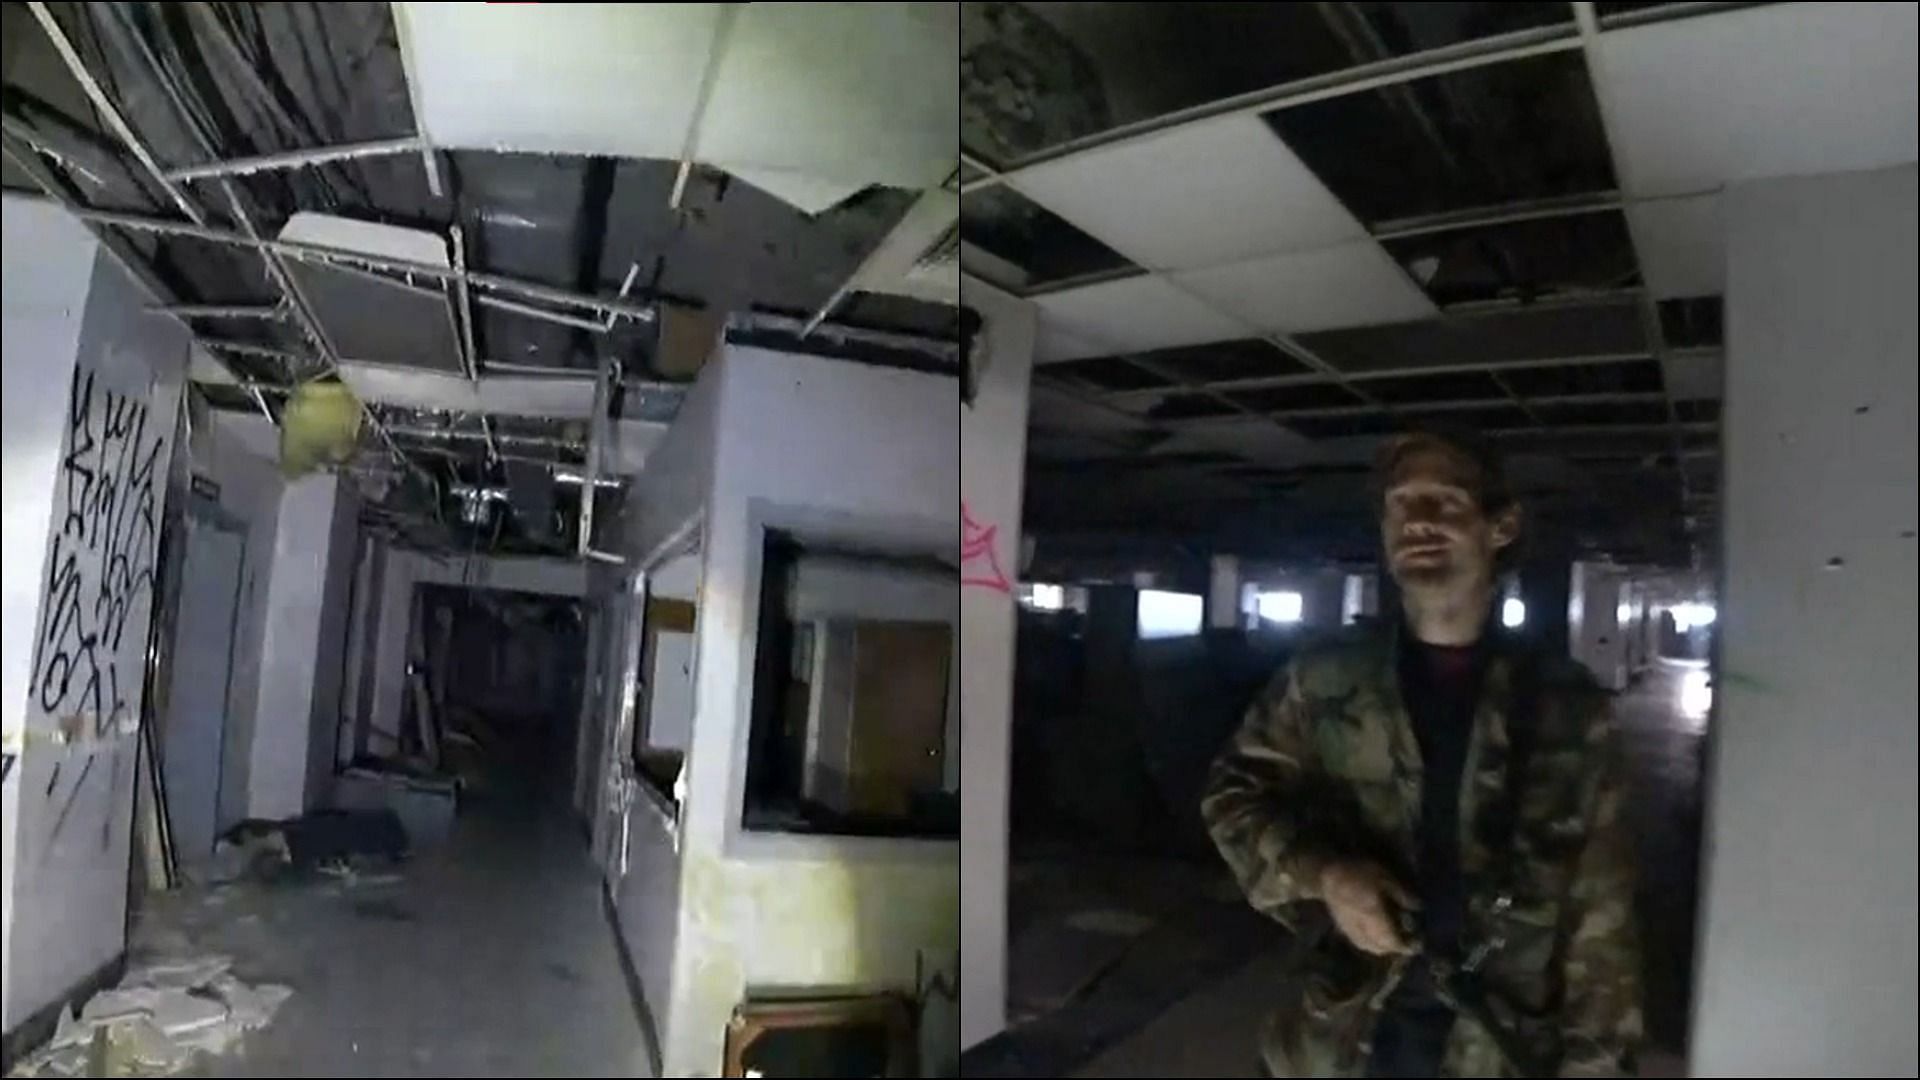 The broadcaster did not have a good time while traversing an abandoned building (Image via Sportskeeda)